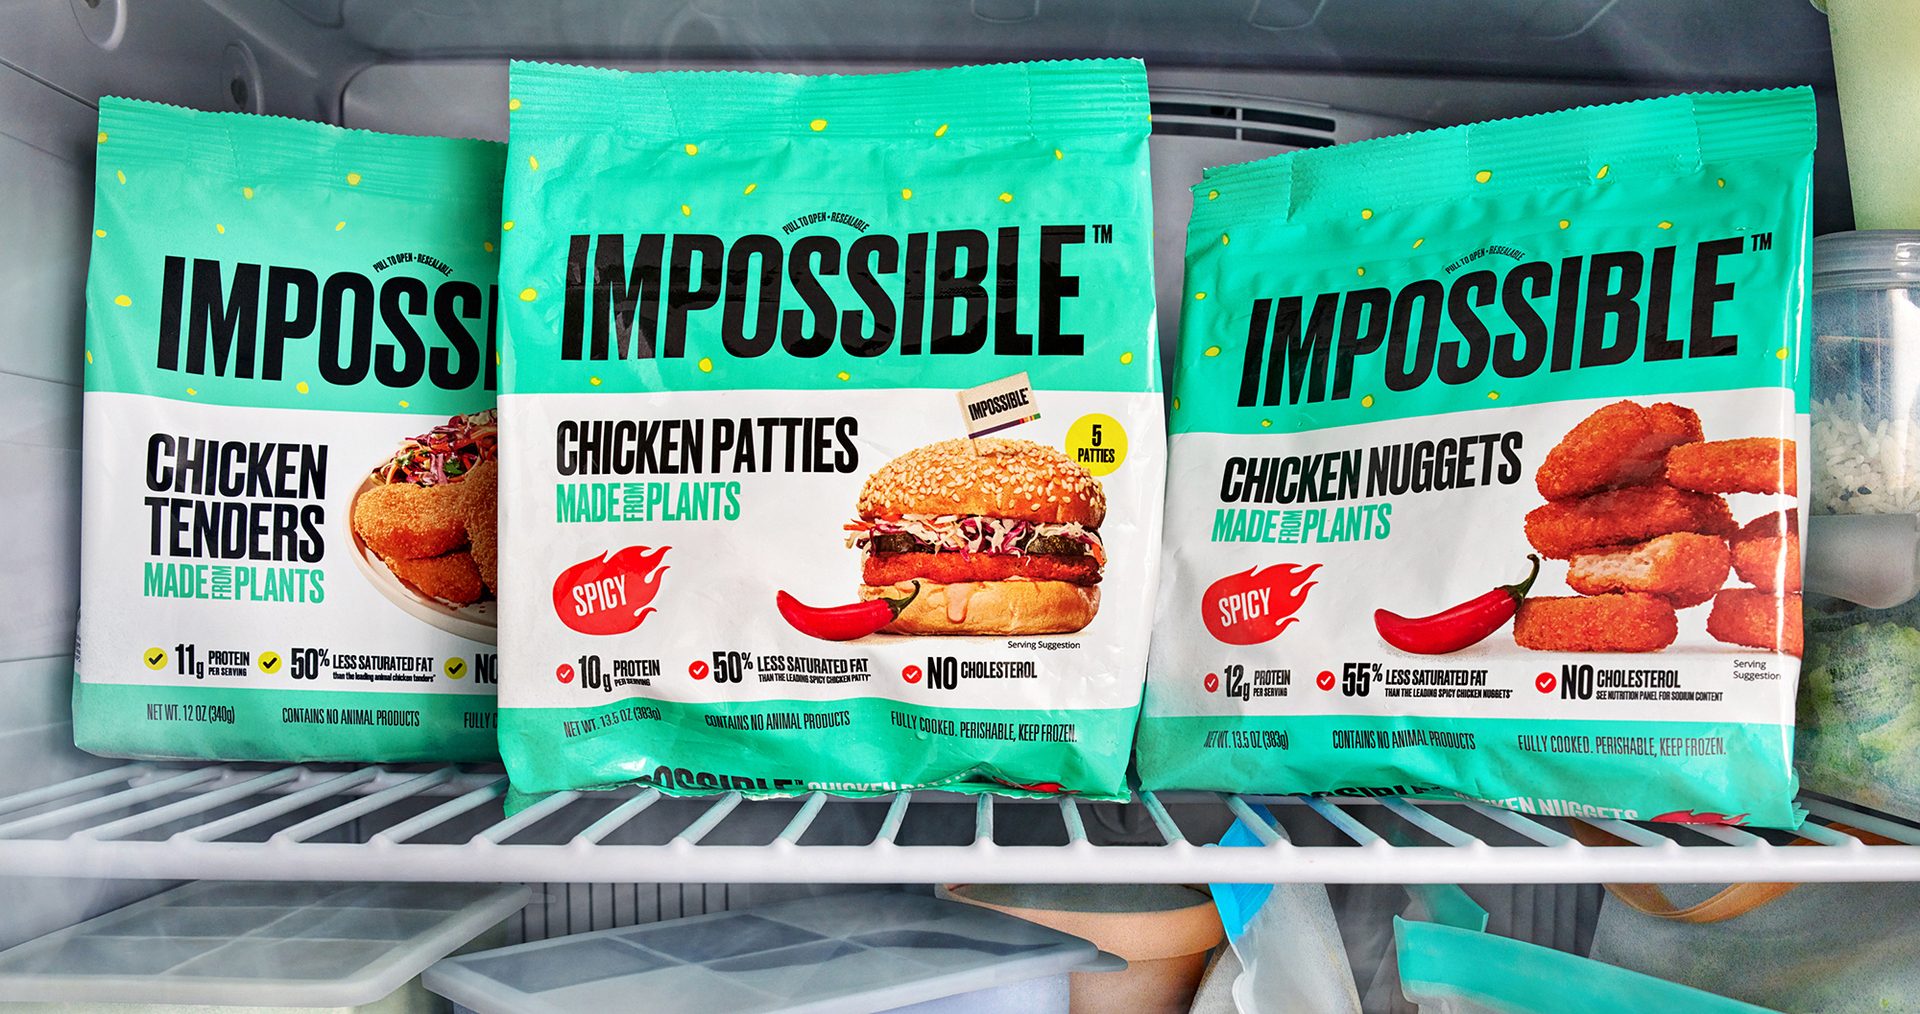 Spicy chicken nuggets, spicy chicken patties and chicken tenders from Impossible Foods